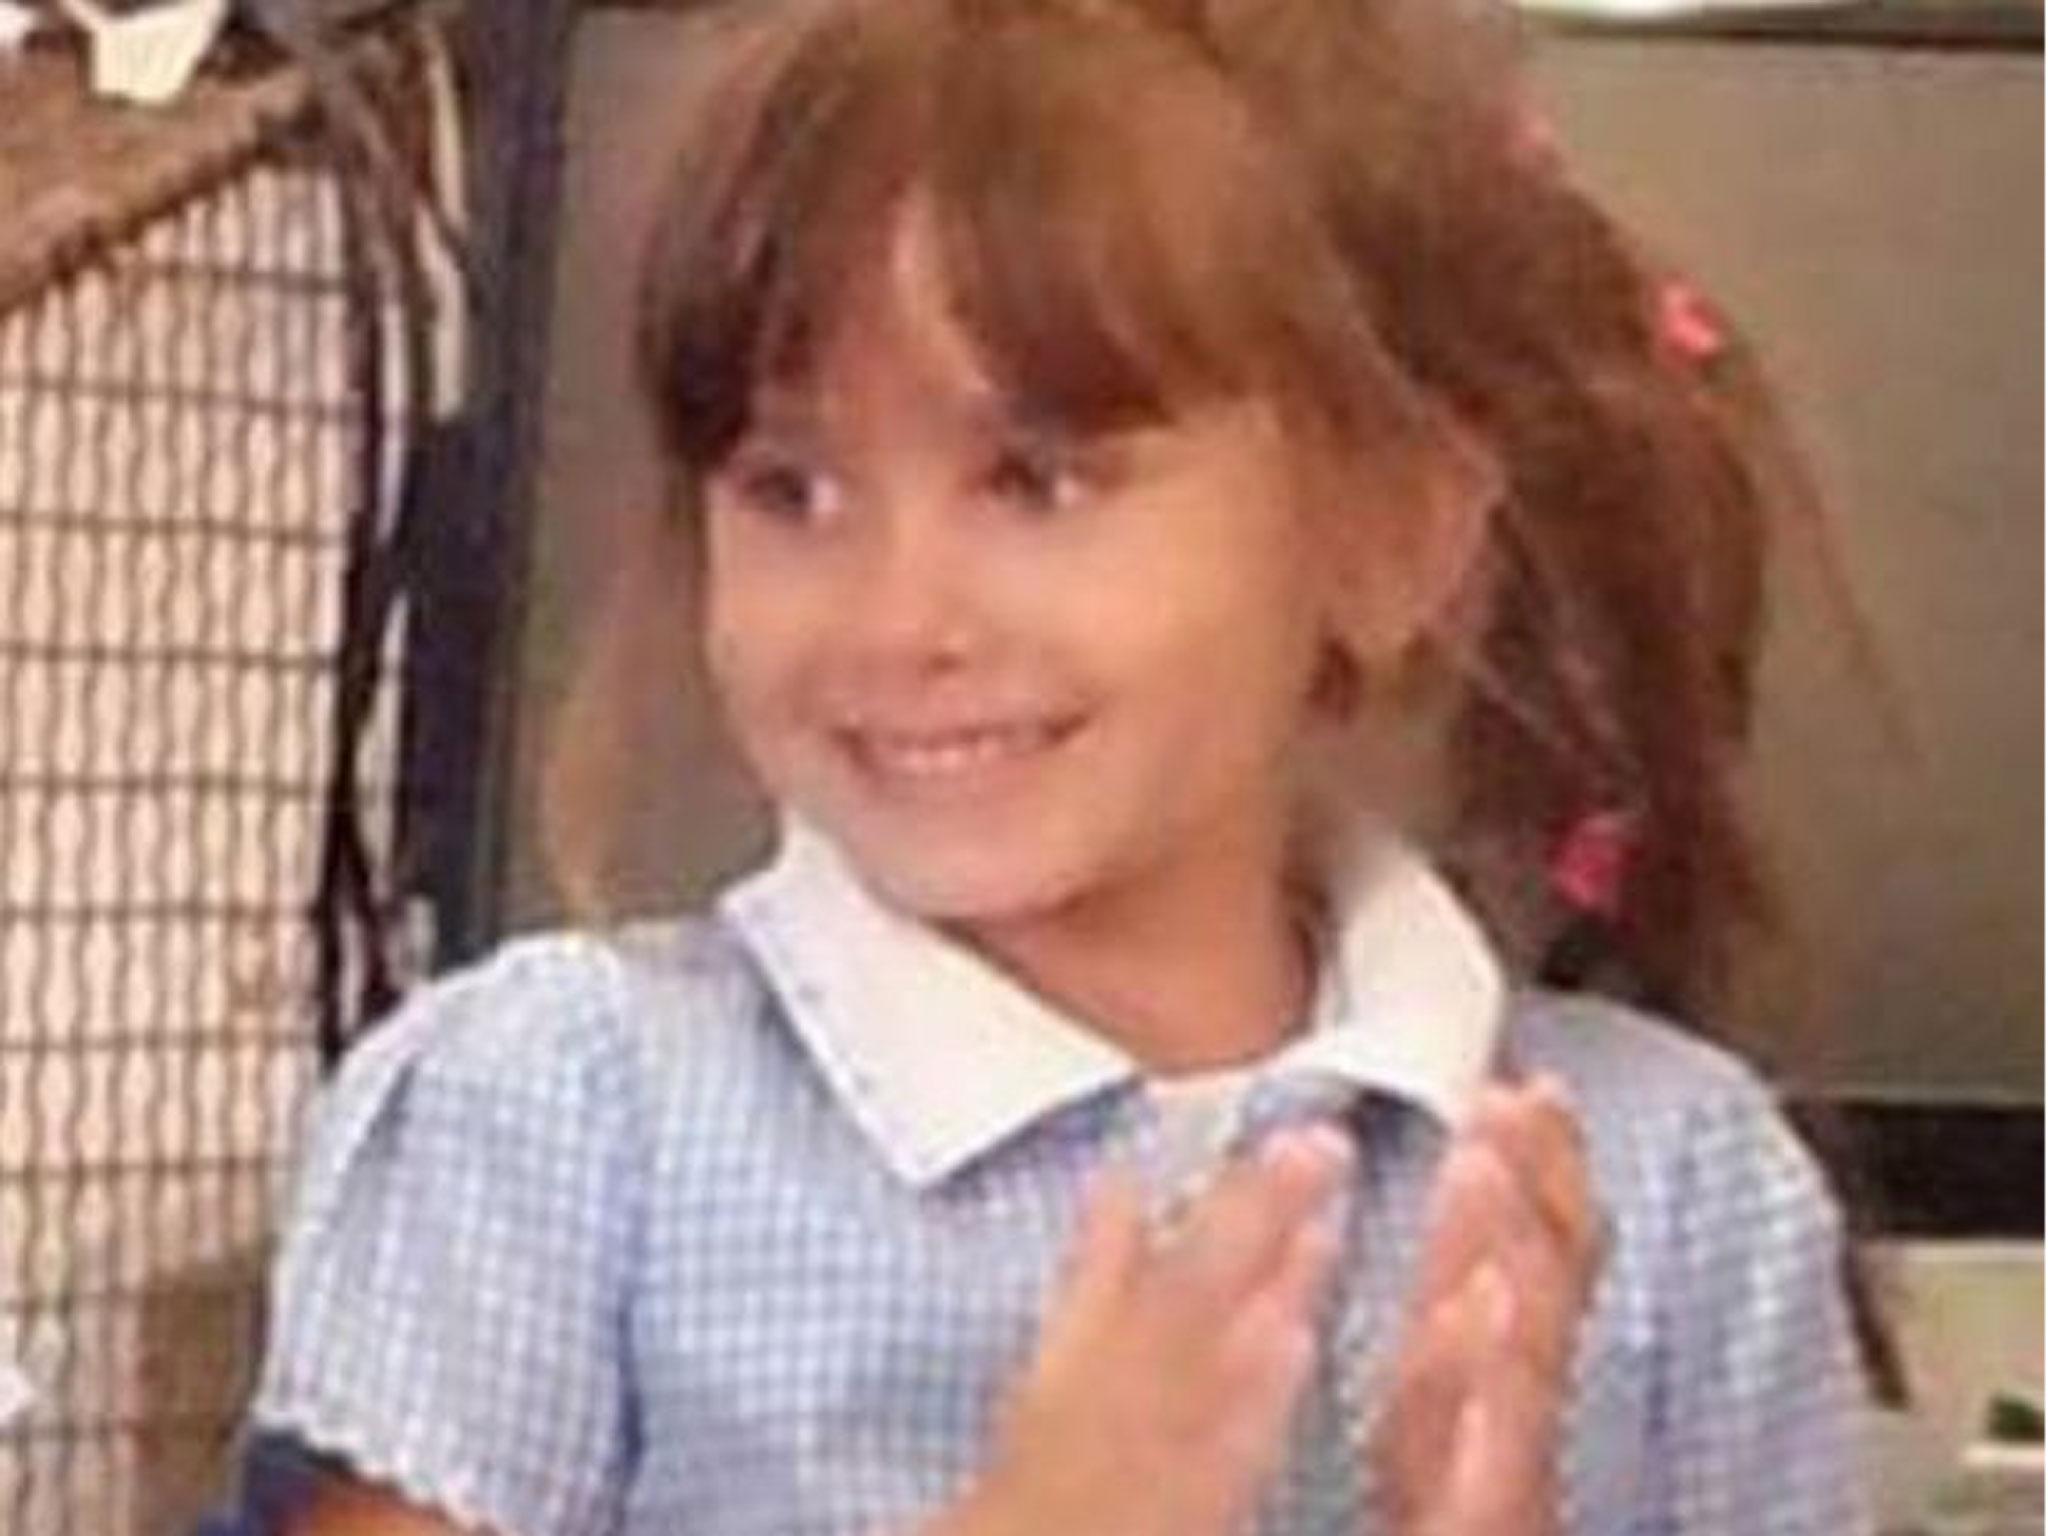 Katie Rough was killed on a playing field in the Woodthorpe area of York in January